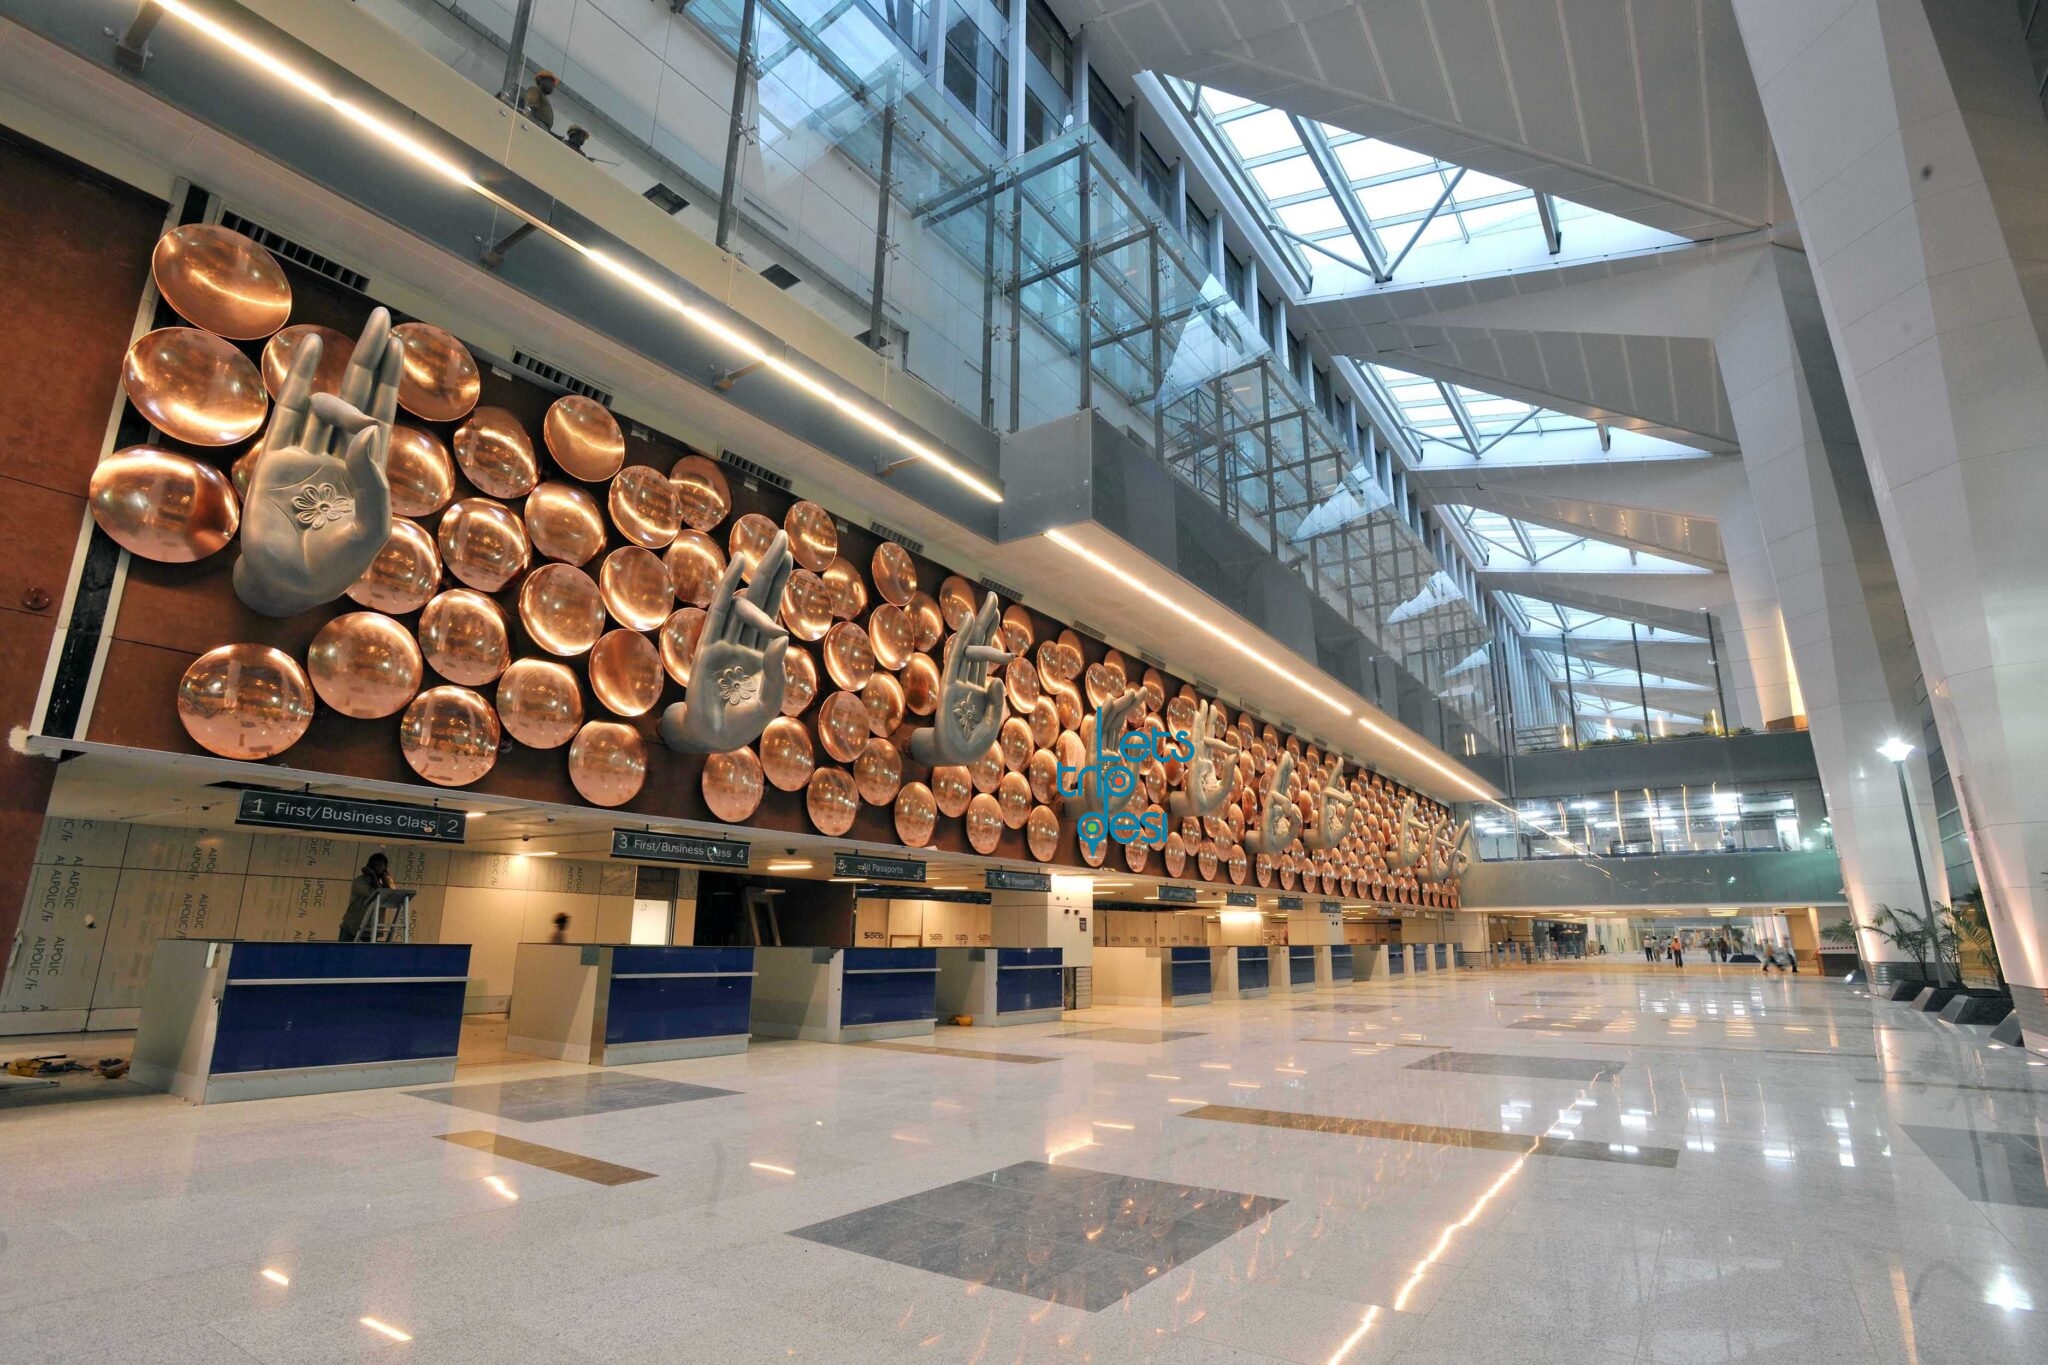 Delhi Becomes The 2nd Busiest Airport in The world in March, Replacing Dubai